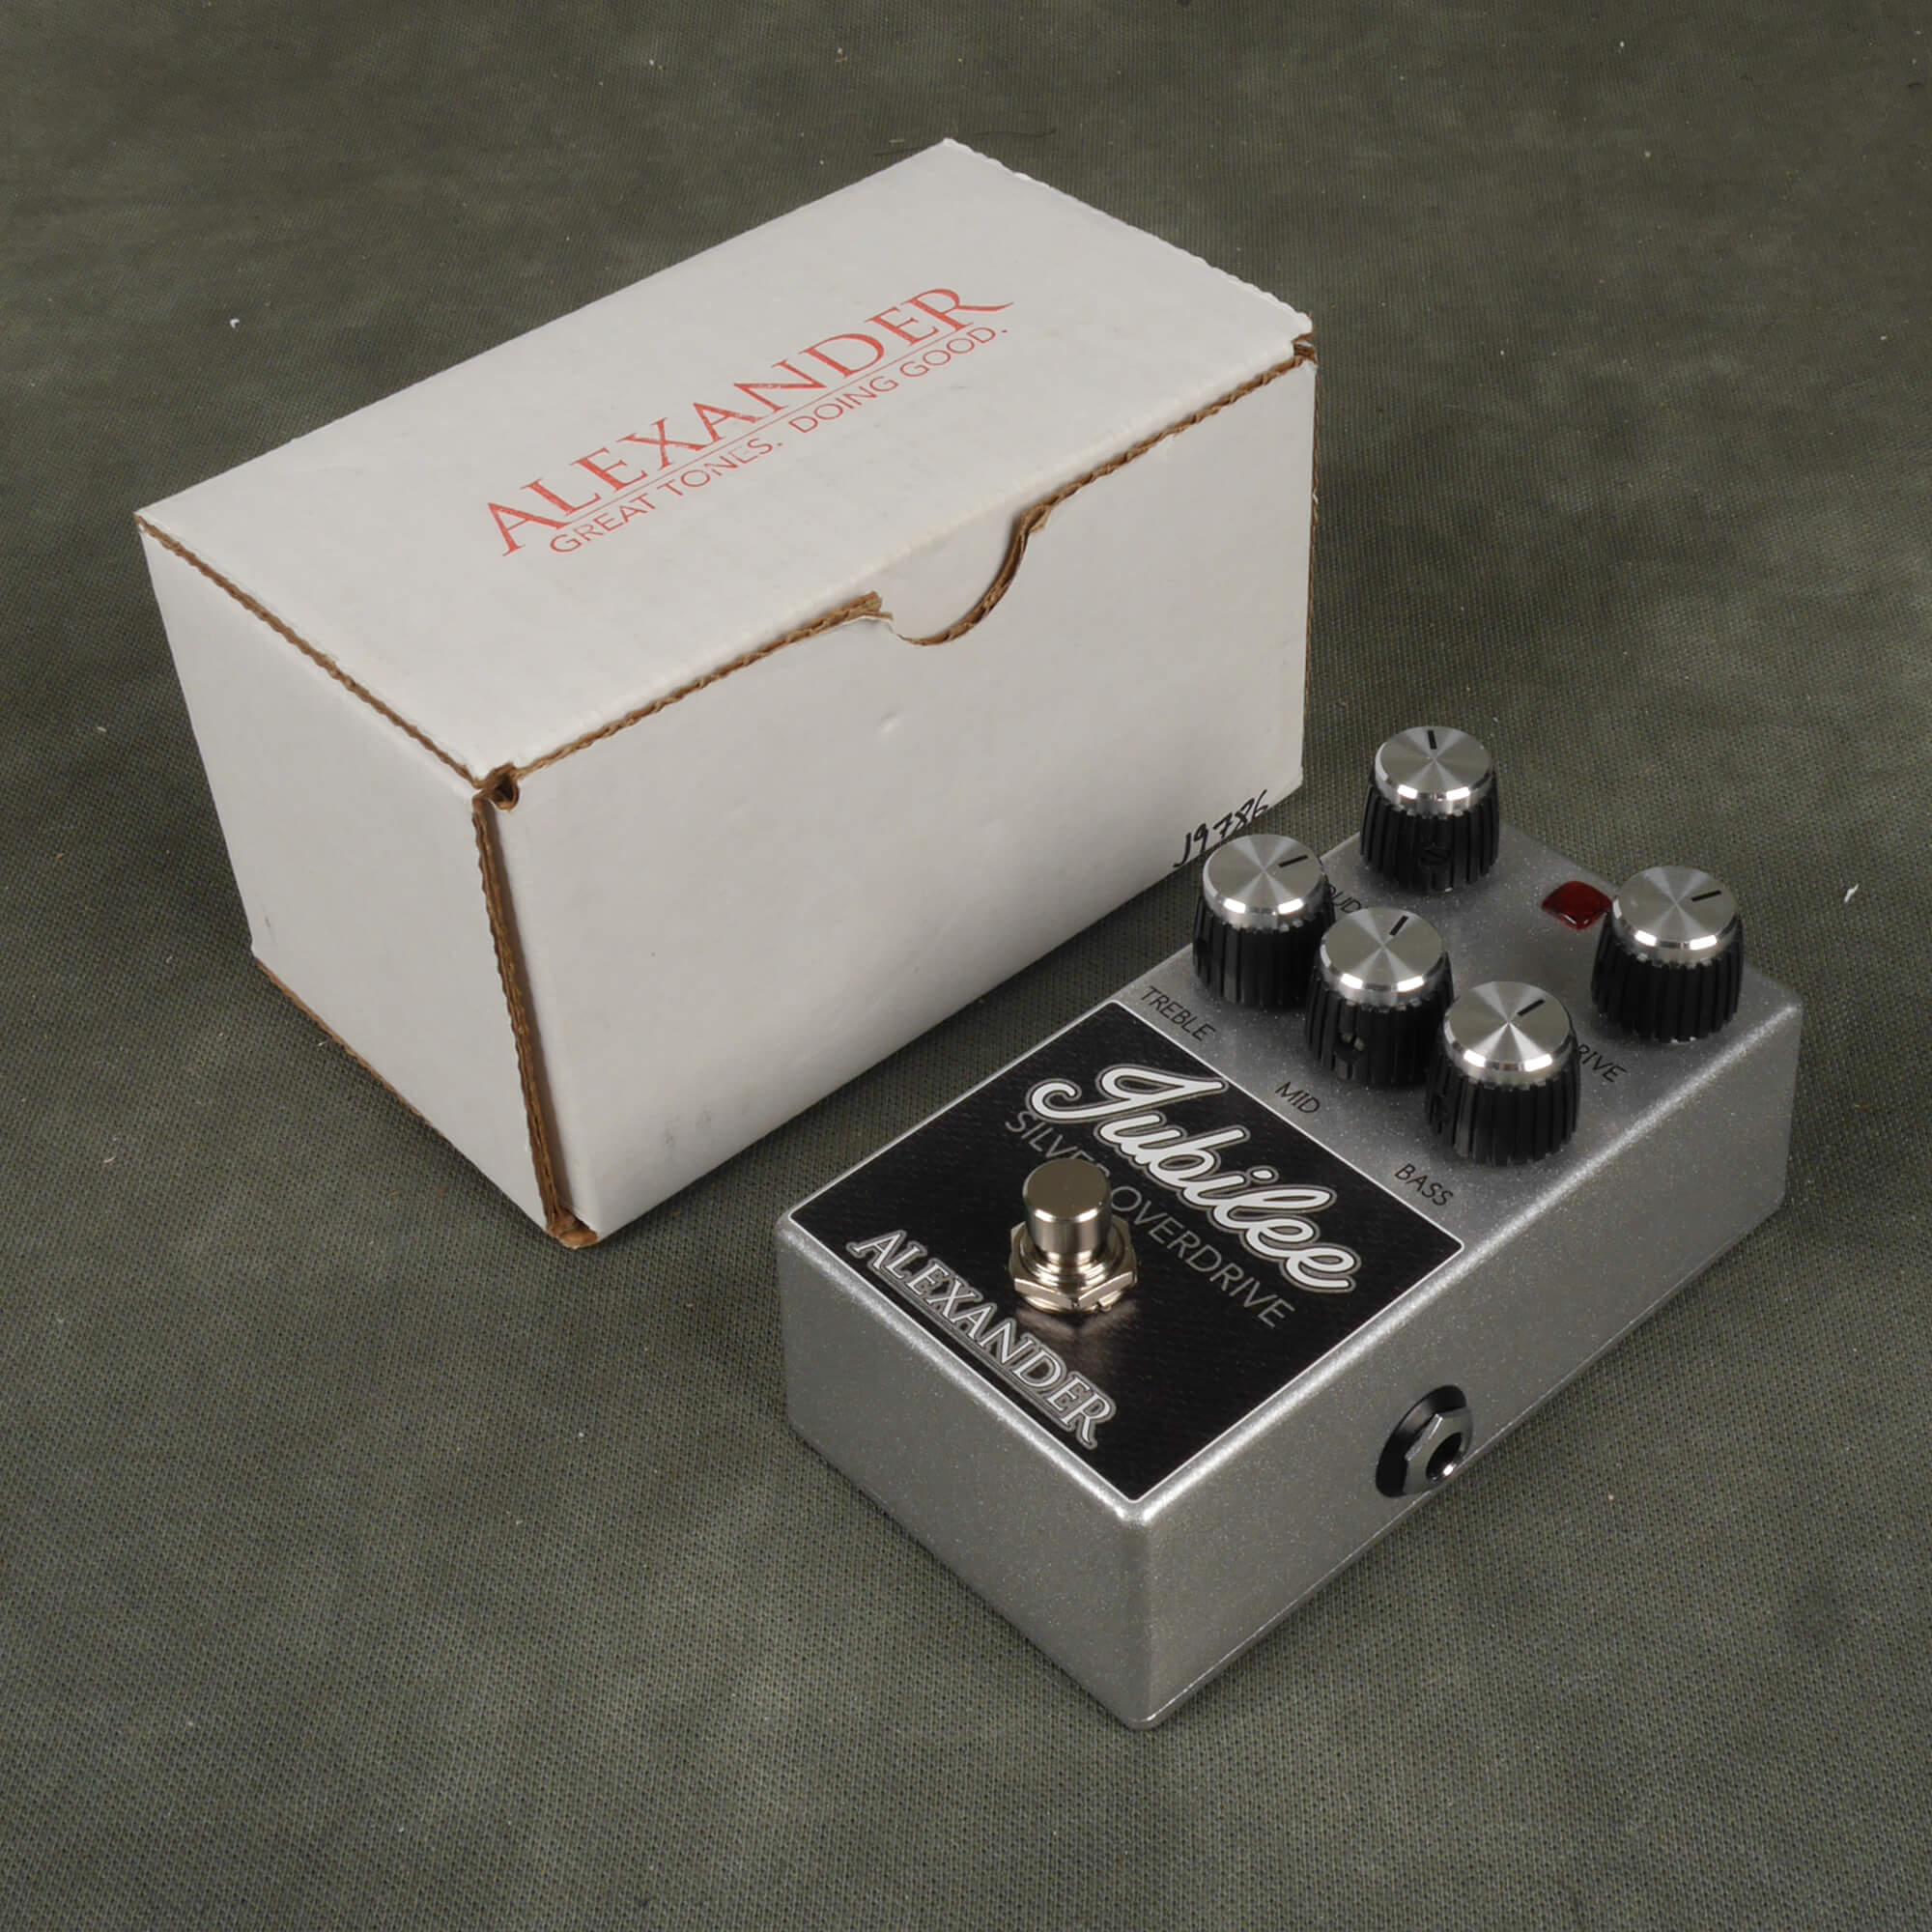 Alexander Pedals Jubilee Silver Overdrive FX Pedal w/Box - 2nd Hand